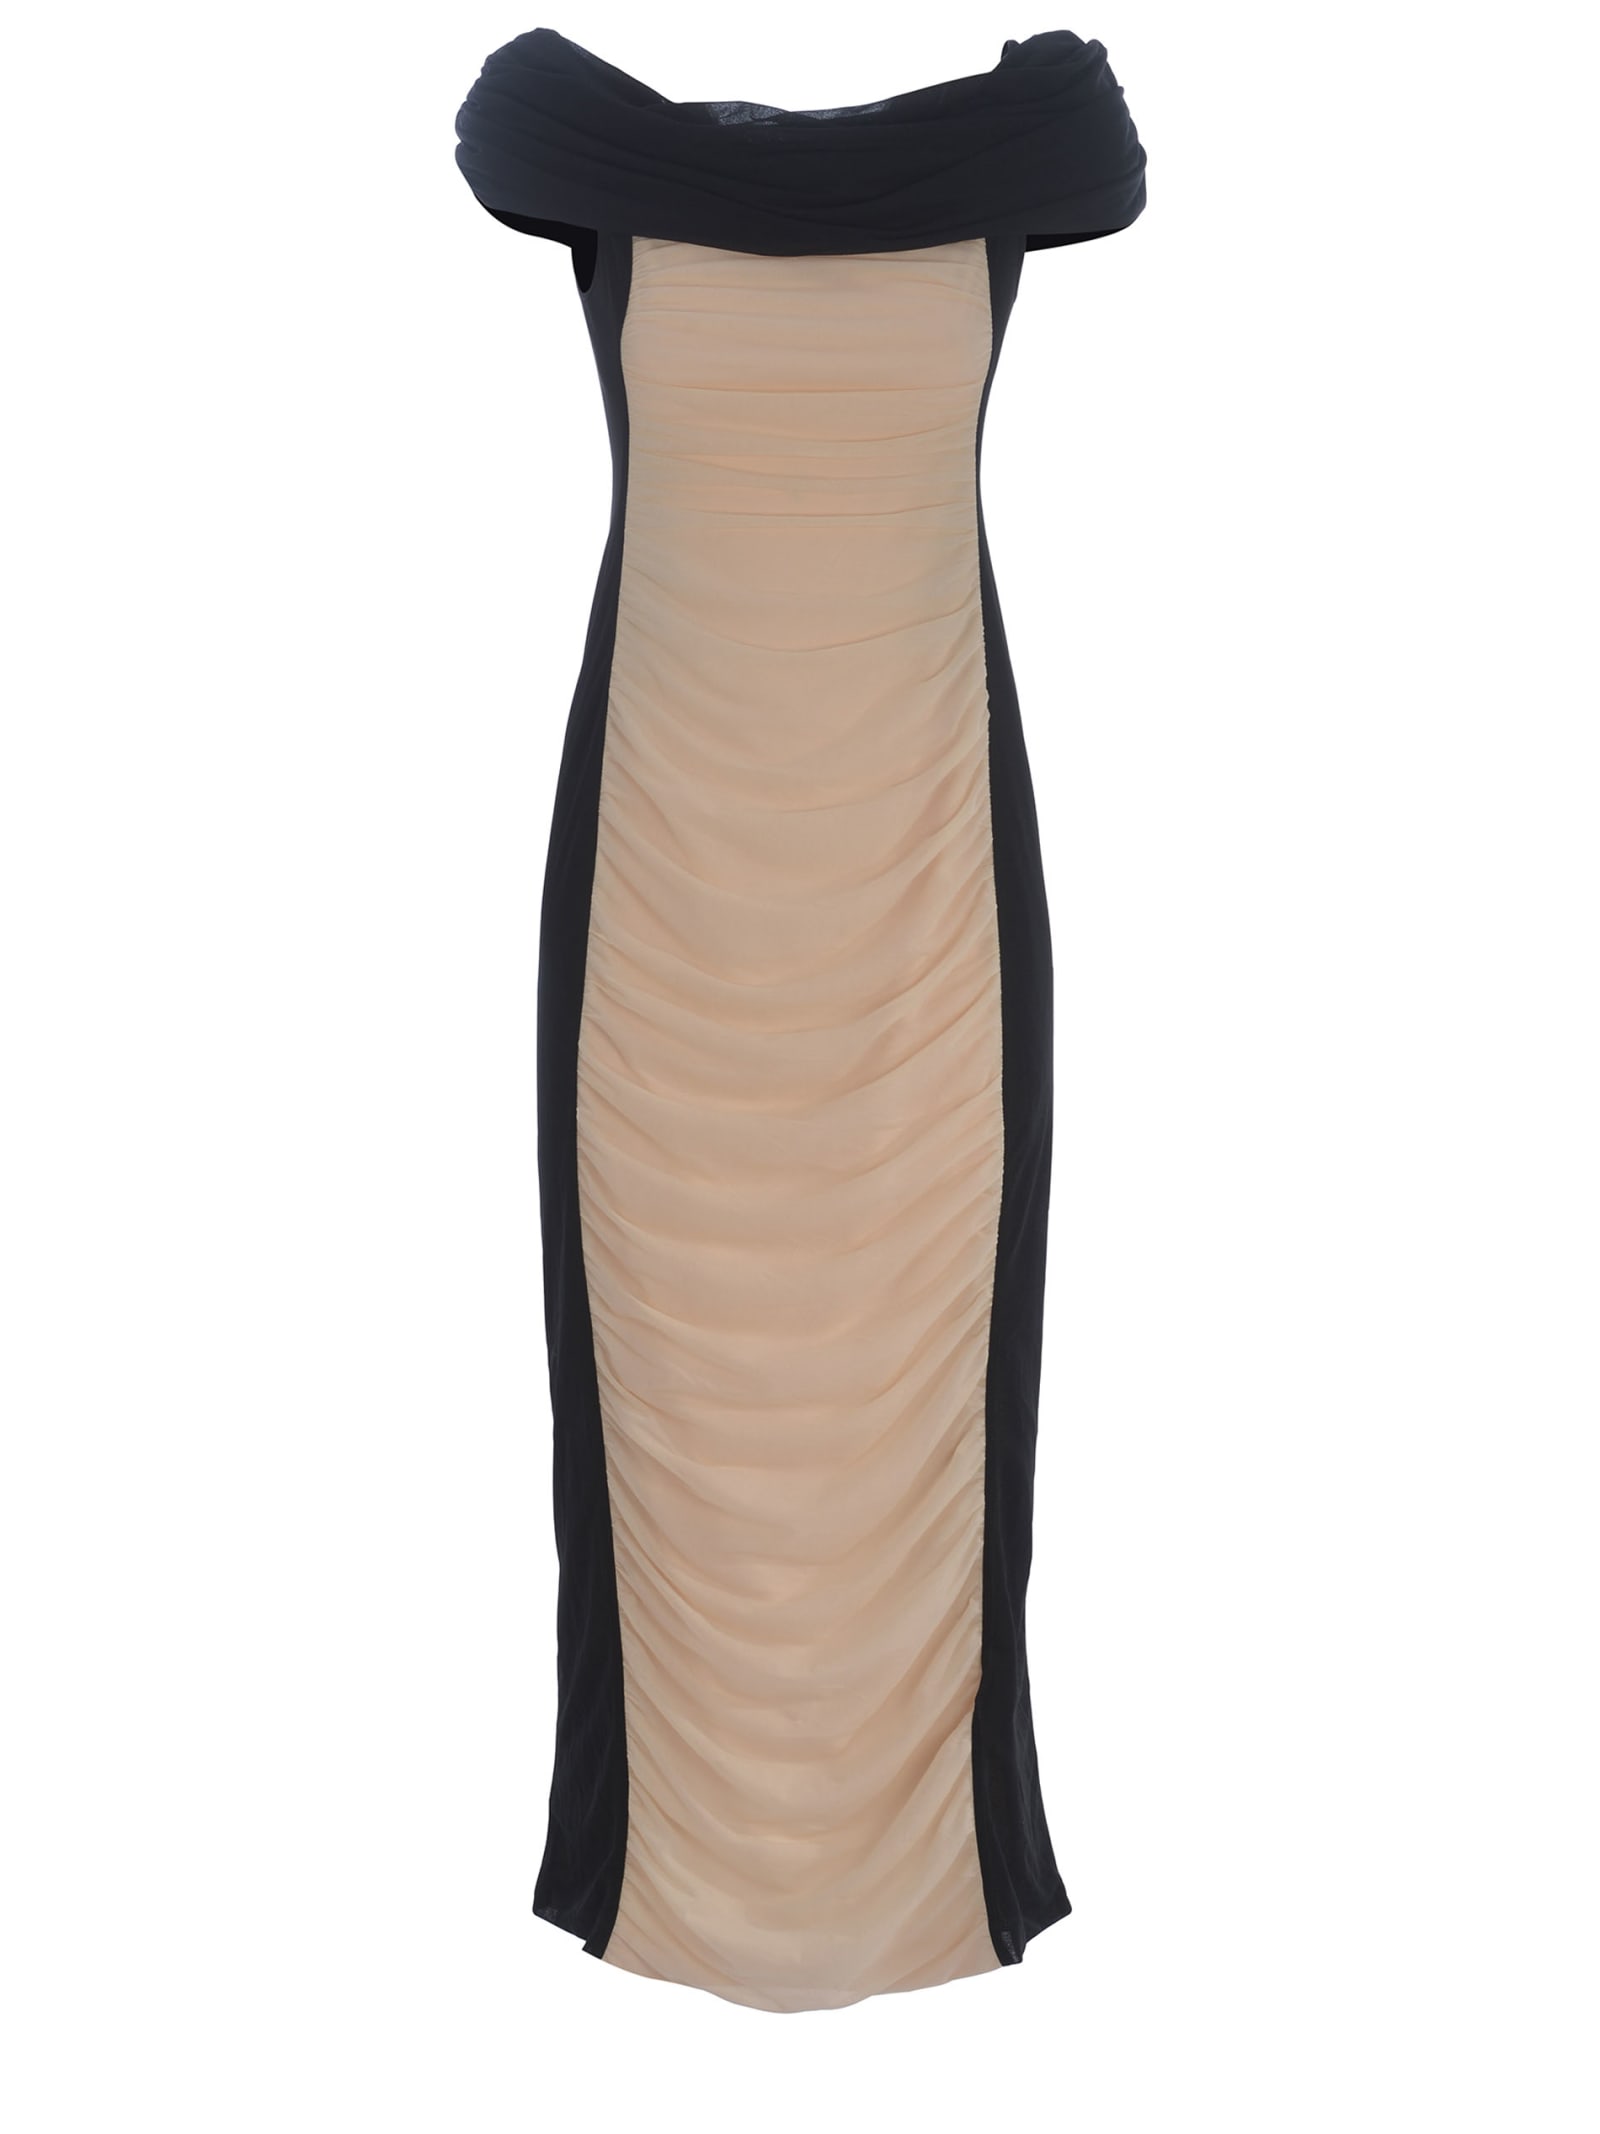 Shop Rotate Birger Christensen Dress Rotate Made Of Two-tone In Beige